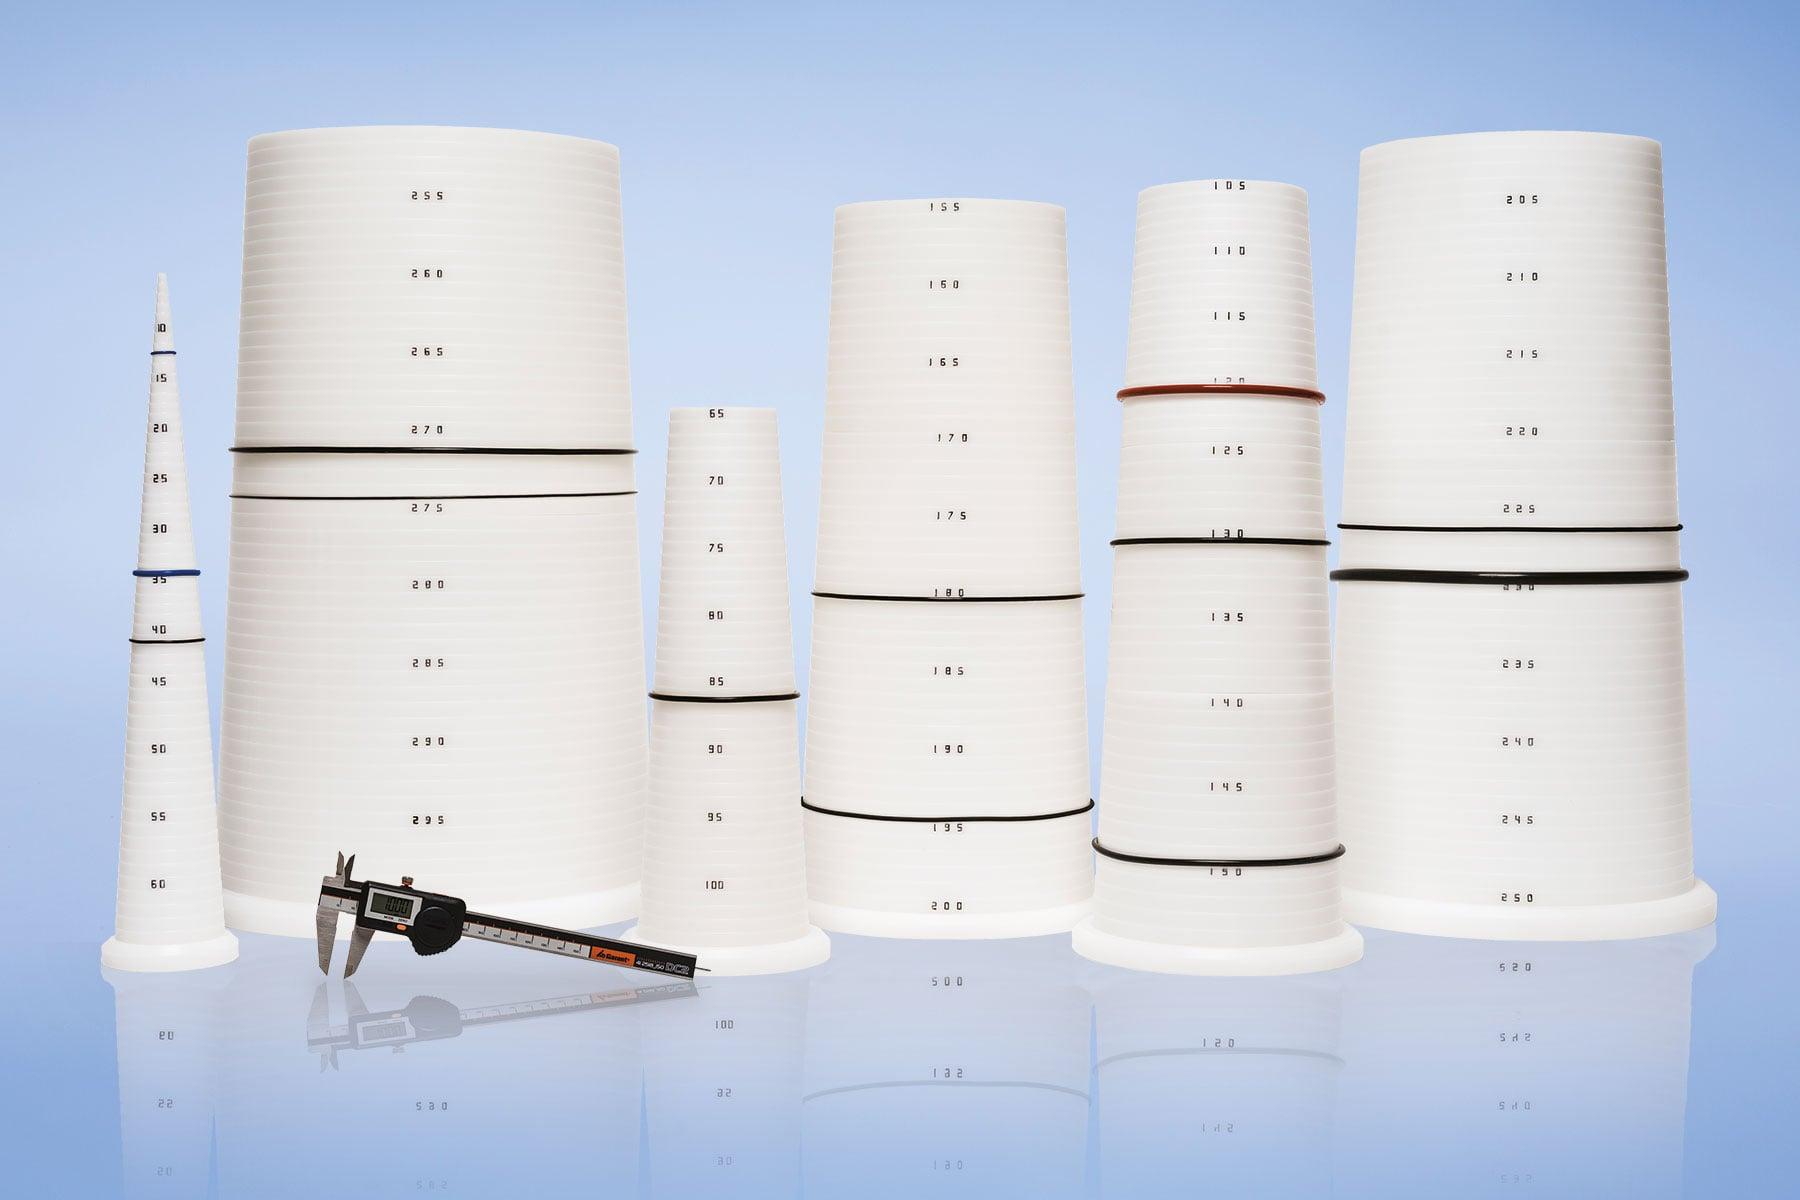 Product O-ring measuring towers | Hänssler image